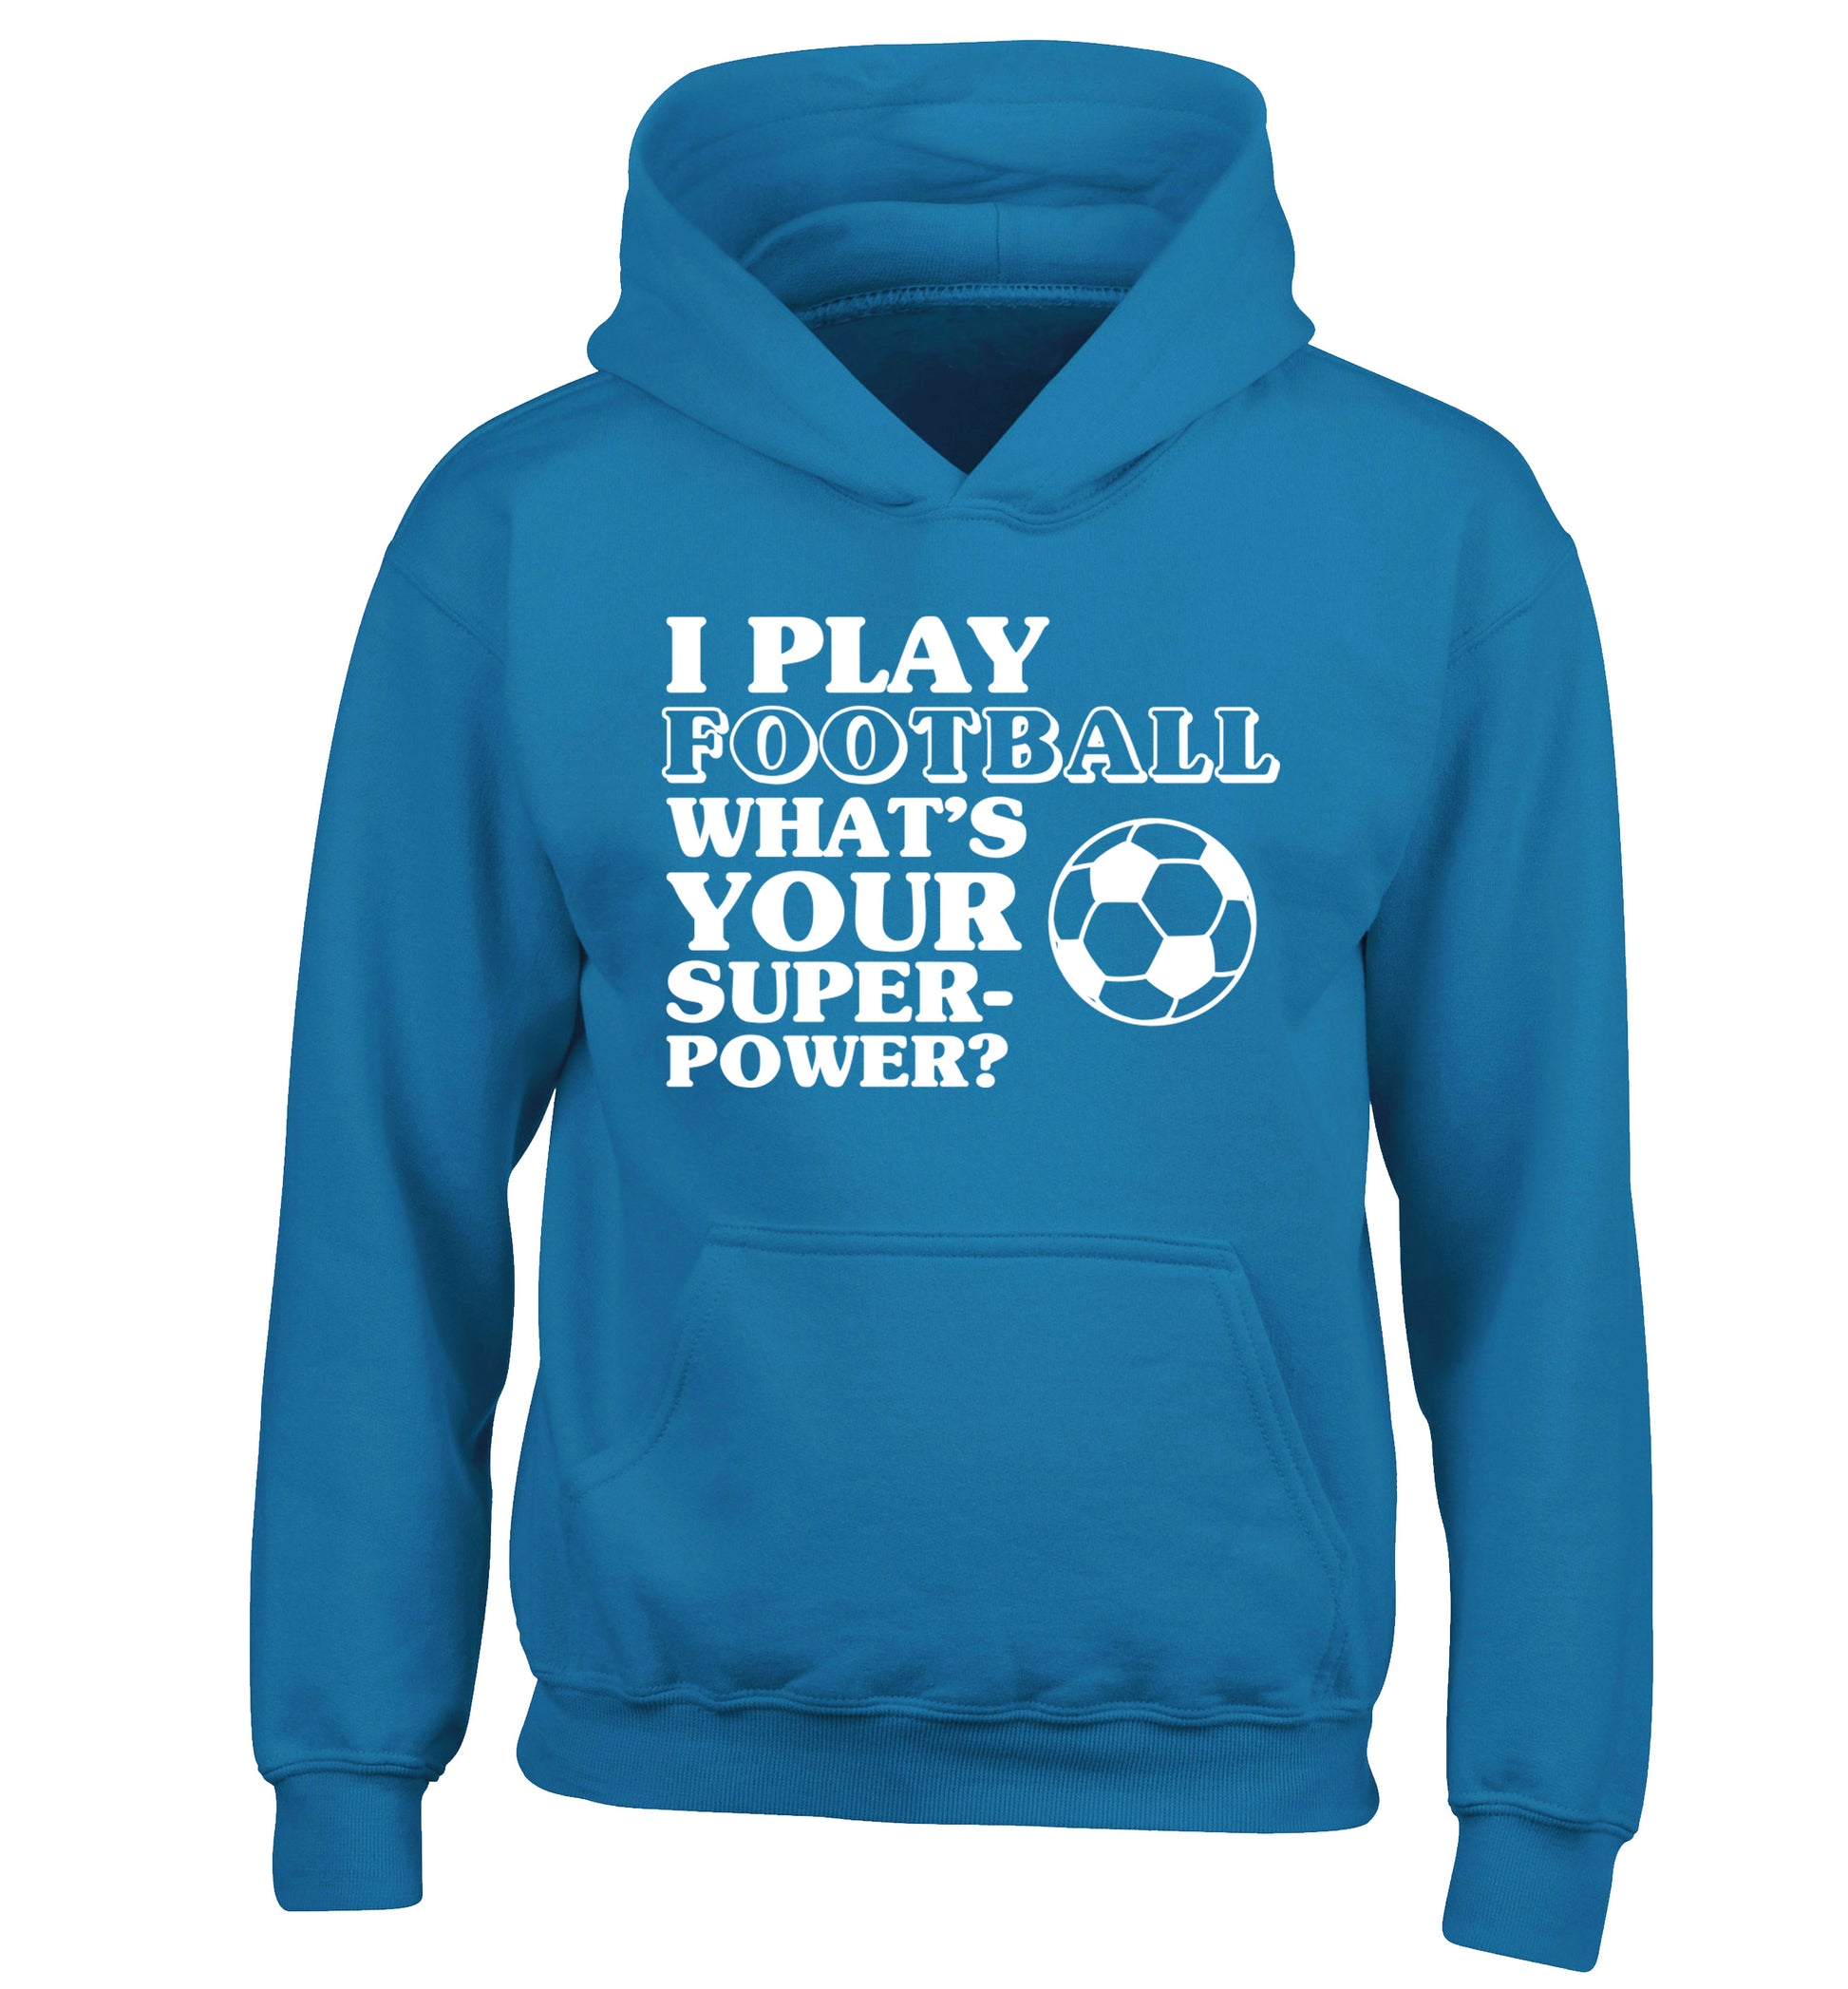 I play football what's your superpower? children's blue hoodie 12-14 Years